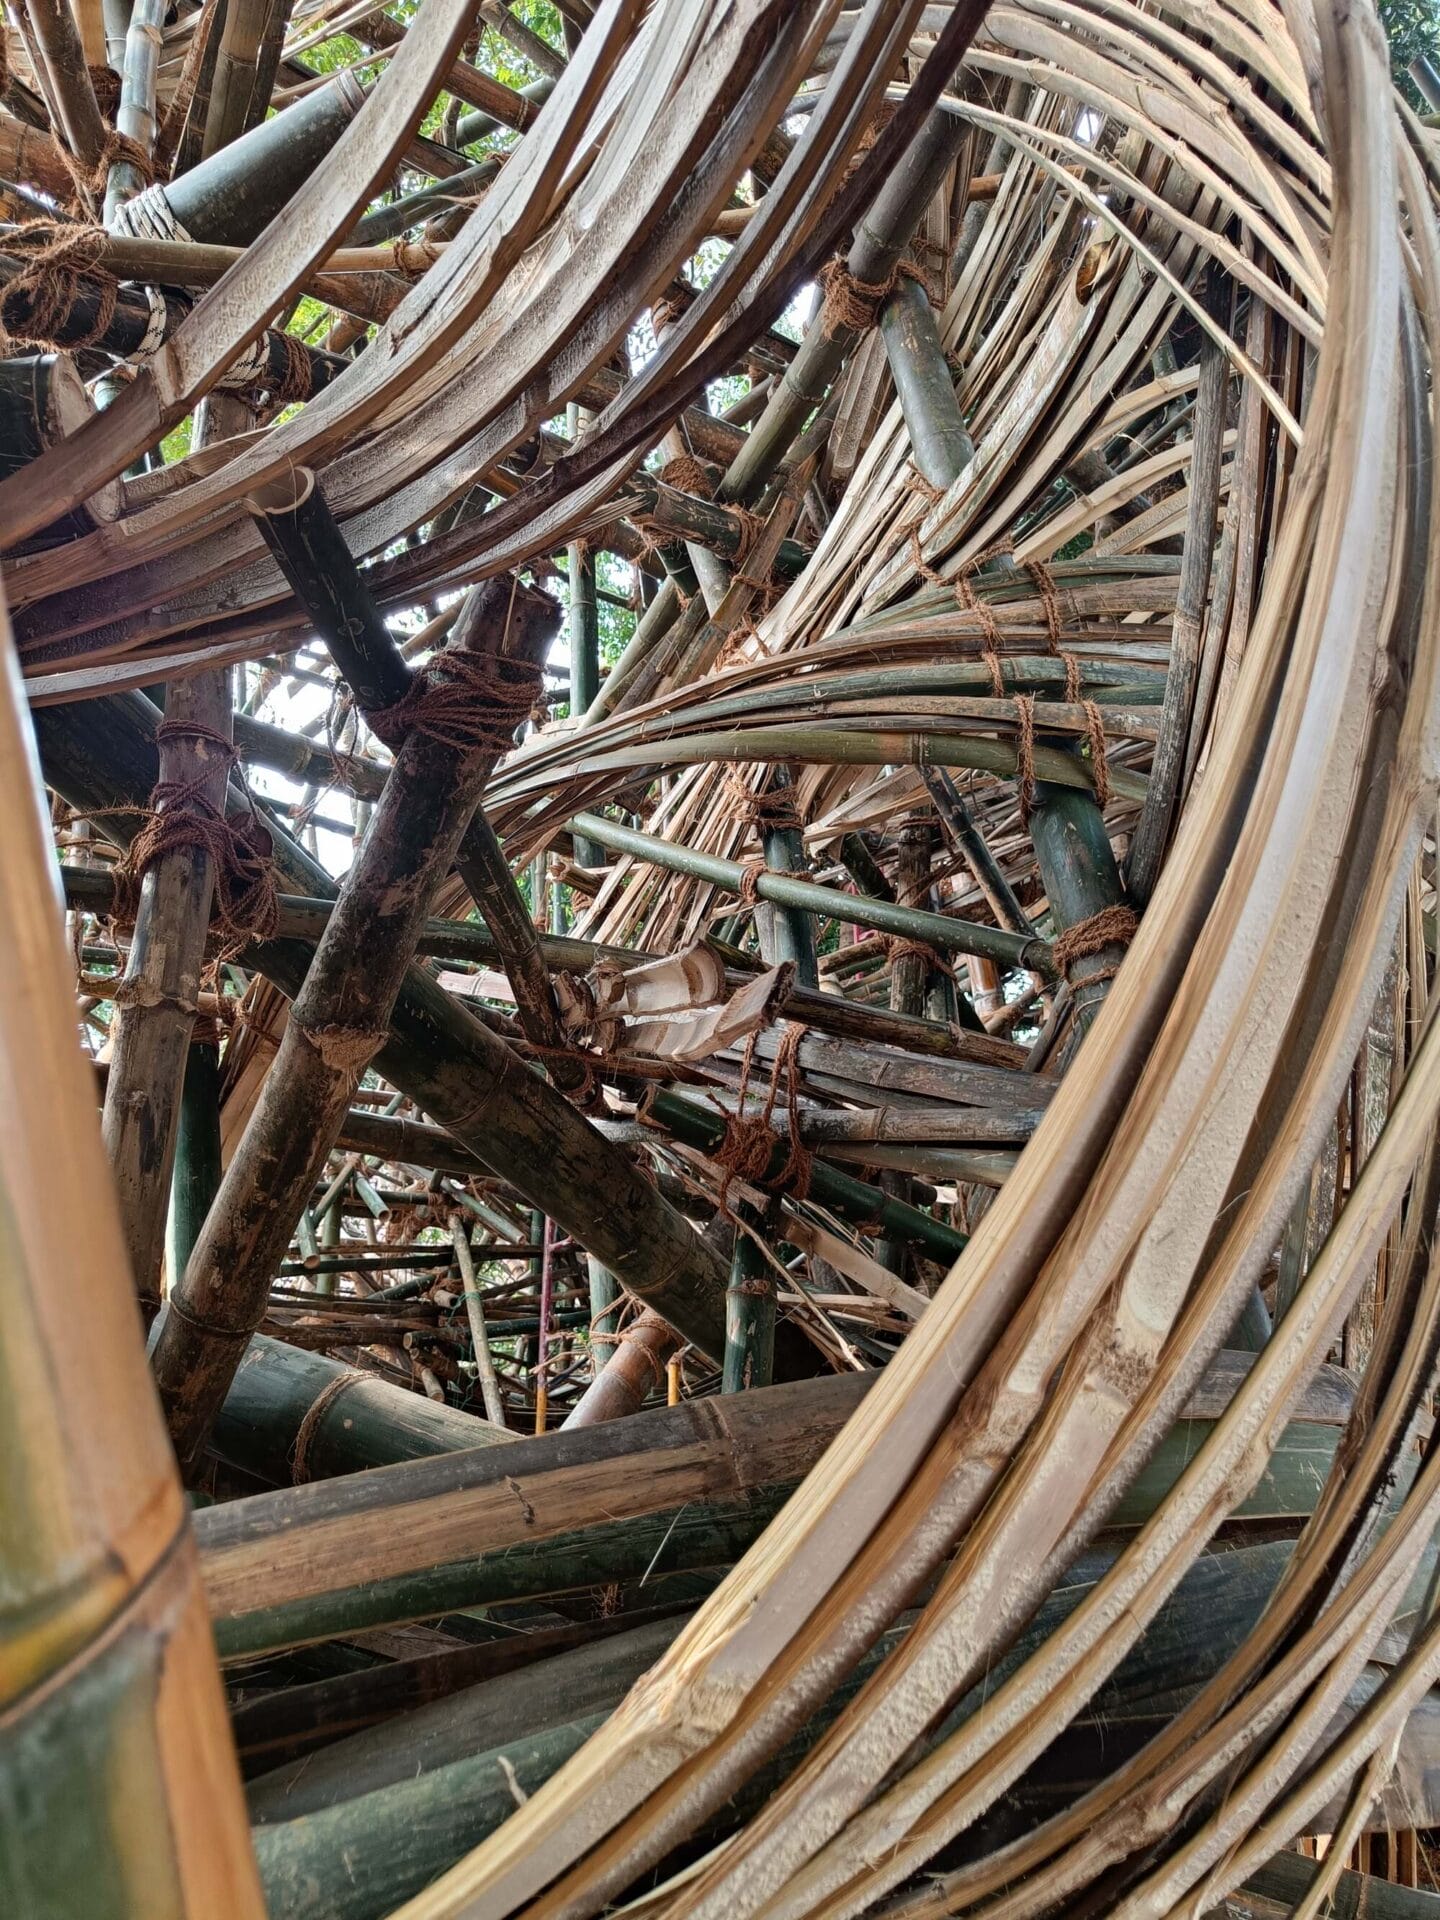 a detail of a swirling bamboo structure